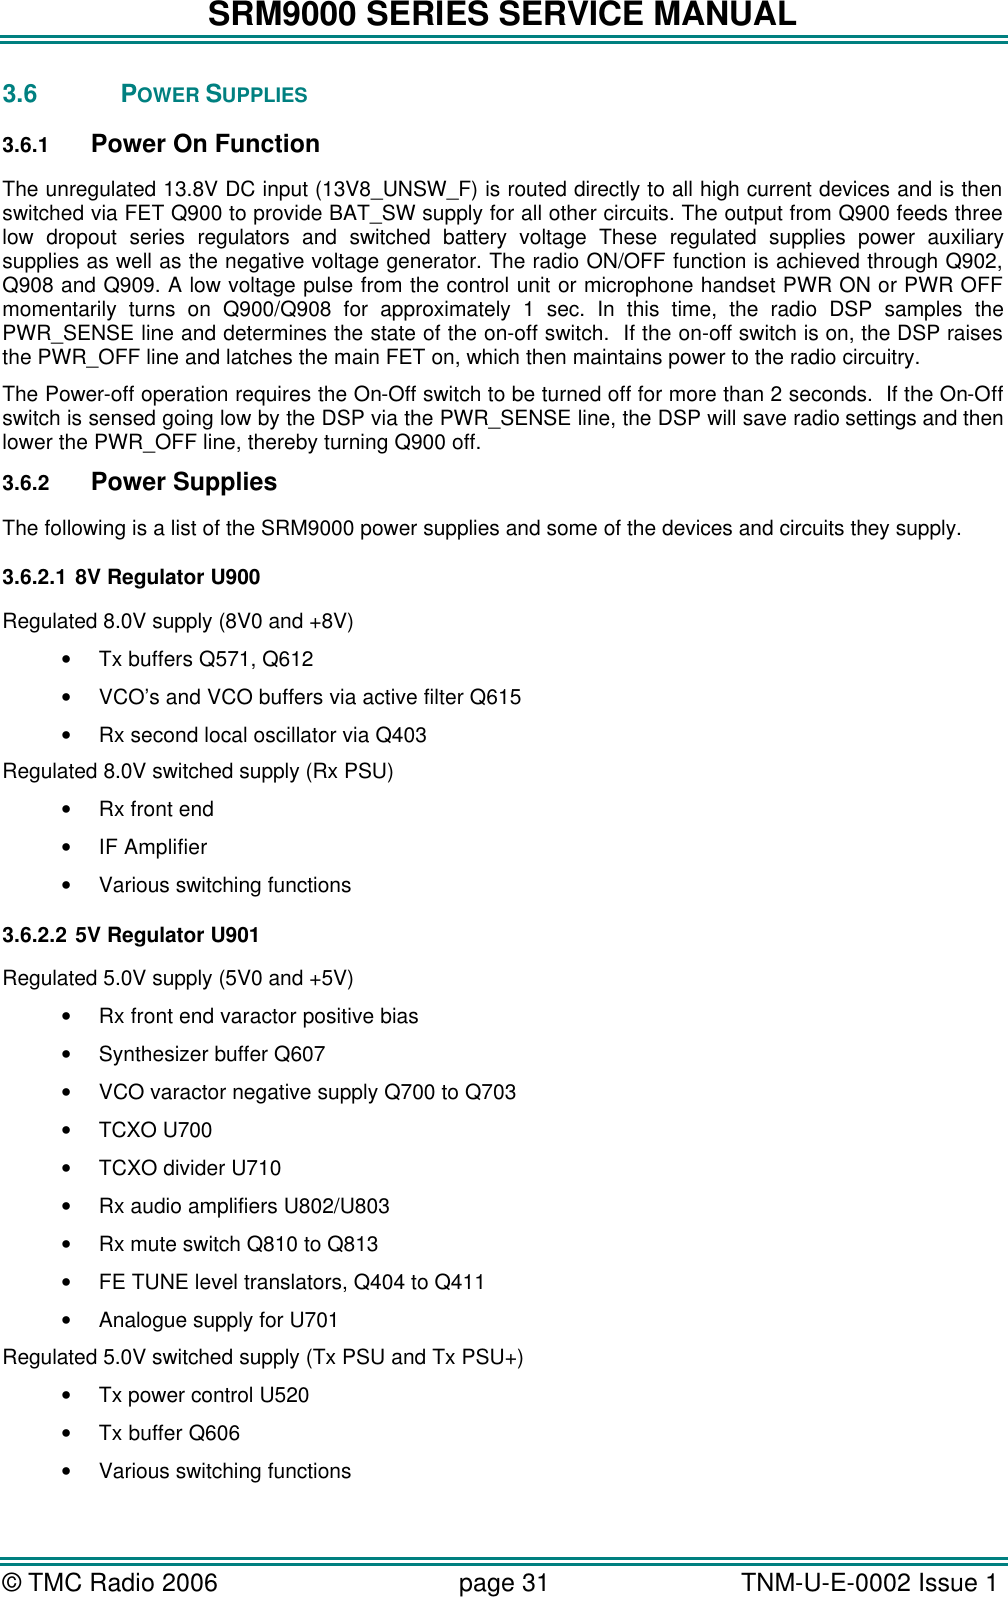 SRM9000 SERIES SERVICE MANUAL © TMC Radio 2006 page 31   TNM-U-E-0002 Issue 1  3.6 POWER SUPPLIES 3.6.1 Power On Function The unregulated 13.8V DC input (13V8_UNSW_F) is routed directly to all high current devices and is then switched via FET Q900 to provide BAT_SW supply for all other circuits. The output from Q900 feeds three low dropout series regulators and switched battery voltage These regulated supplies power auxiliary supplies as well as the negative voltage generator. The radio ON/OFF function is achieved through Q902, Q908 and Q909. A low voltage pulse from the control unit or microphone handset PWR ON or PWR OFF momentarily turns on Q900/Q908 for approximately 1 sec. In this time, the radio DSP samples the PWR_SENSE line and determines the state of the on-off switch.  If the on-off switch is on, the DSP raises the PWR_OFF line and latches the main FET on, which then maintains power to the radio circuitry. The Power-off operation requires the On-Off switch to be turned off for more than 2 seconds.  If the On-Off switch is sensed going low by the DSP via the PWR_SENSE line, the DSP will save radio settings and then lower the PWR_OFF line, thereby turning Q900 off. 3.6.2 Power Supplies The following is a list of the SRM9000 power supplies and some of the devices and circuits they supply. 3.6.2.1 8V Regulator U900 Regulated 8.0V supply (8V0 and +8V) • Tx buffers Q571, Q612 • VCO’s and VCO buffers via active filter Q615 • Rx second local oscillator via Q403 Regulated 8.0V switched supply (Rx PSU) • Rx front end • IF Amplifier • Various switching functions 3.6.2.2 5V Regulator U901 Regulated 5.0V supply (5V0 and +5V) • Rx front end varactor positive bias • Synthesizer buffer Q607 • VCO varactor negative supply Q700 to Q703 • TCXO U700 • TCXO divider U710 • Rx audio amplifiers U802/U803 • Rx mute switch Q810 to Q813  • FE TUNE level translators, Q404 to Q411 • Analogue supply for U701 Regulated 5.0V switched supply (Tx PSU and Tx PSU+) • Tx power control U520 • Tx buffer Q606 • Various switching functions 